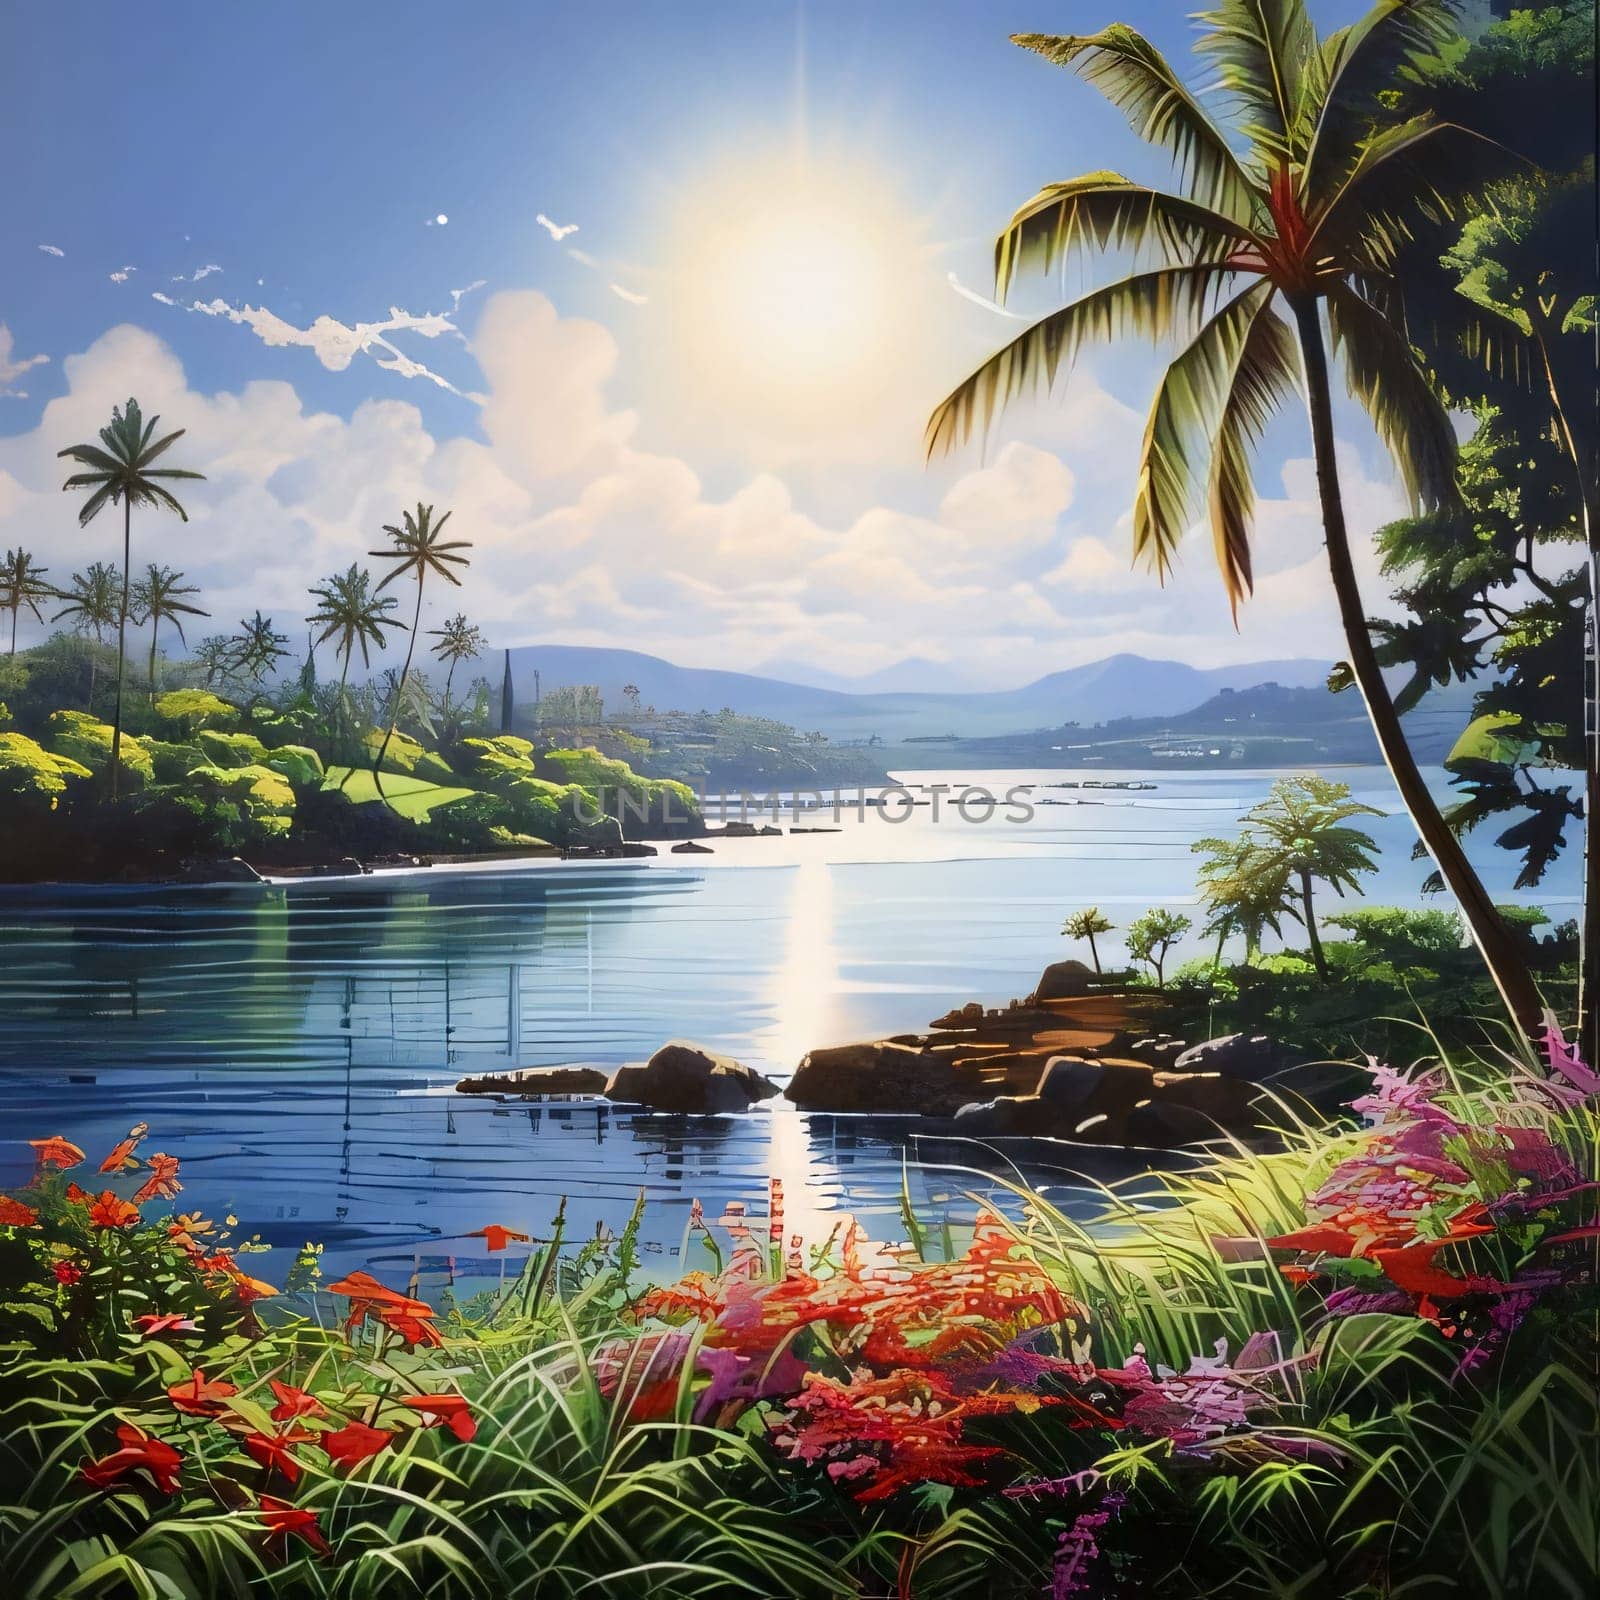 Tropical island with palm trees. Flowering flowers, a symbol of spring, new life. A joyful time of nature waking up to life.